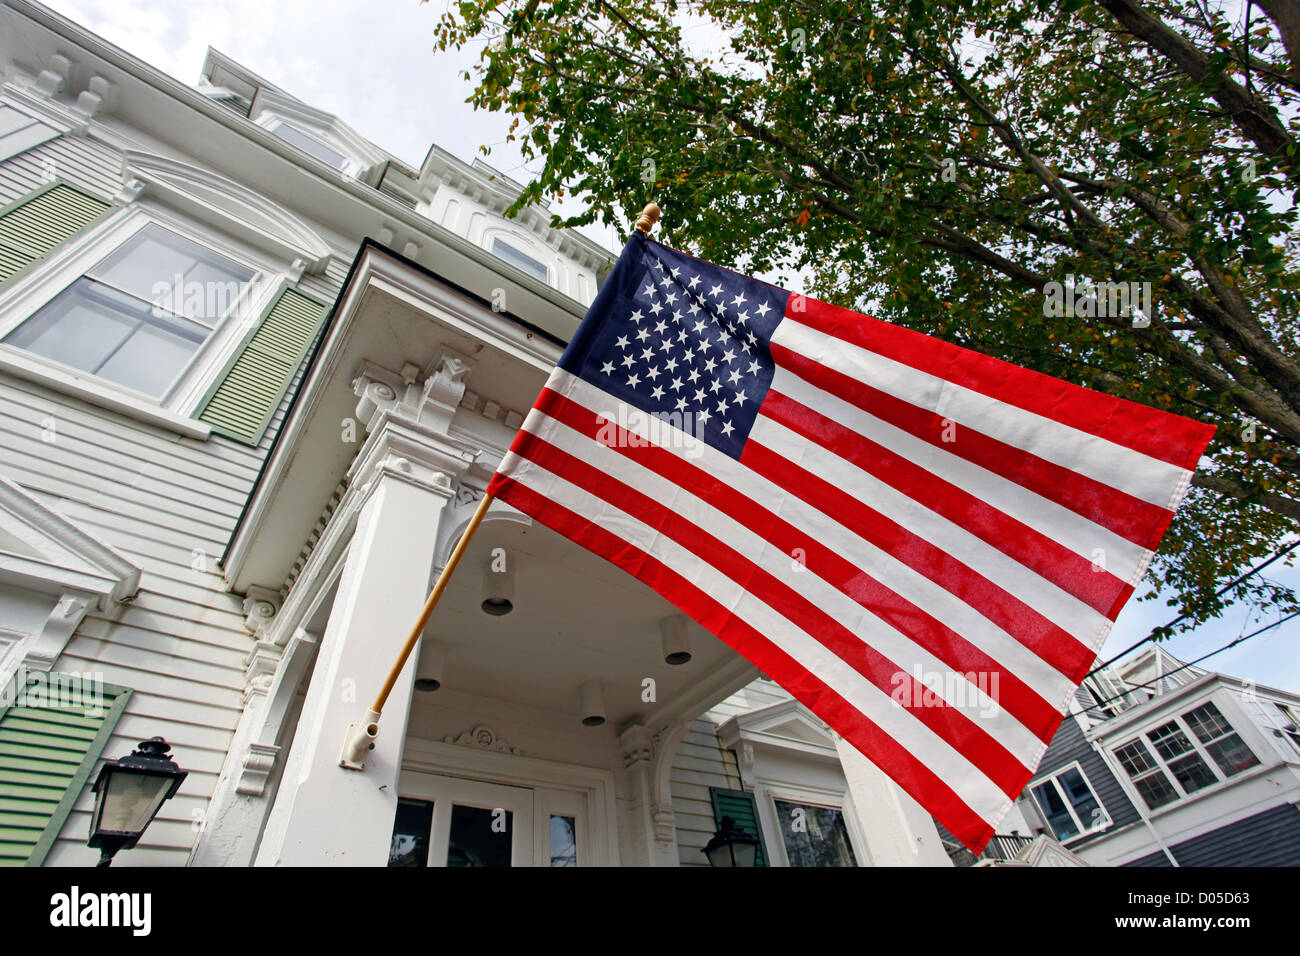 American stars and stripes flag flying, Provincetown, Cape Cod, Massachusetts, America Stock Photo